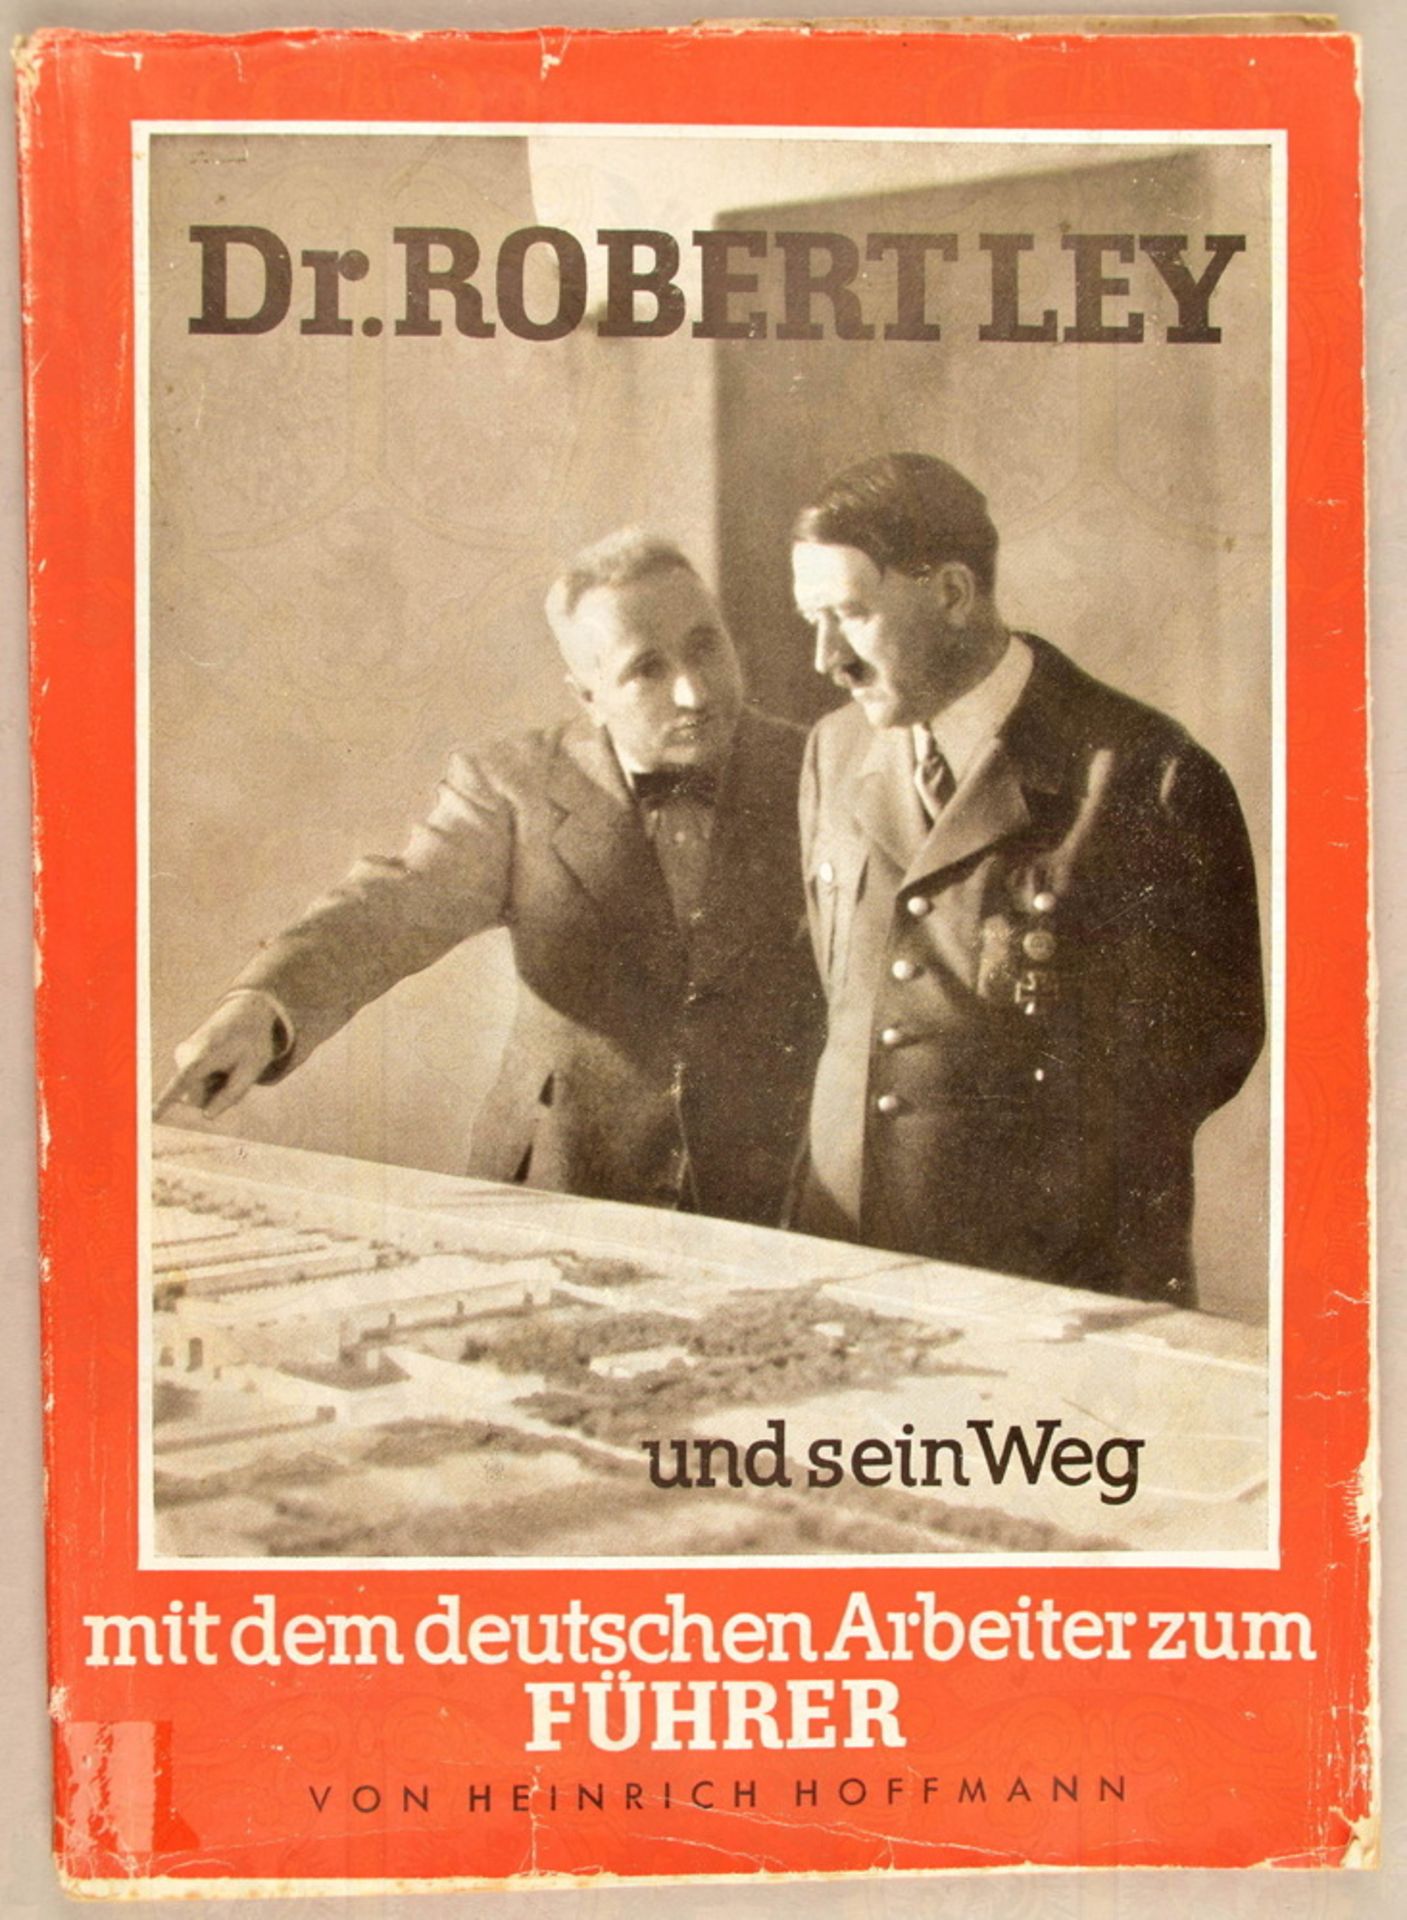 Illustrated book Dr Robert Ley and the German worker 1940 - Image 2 of 3